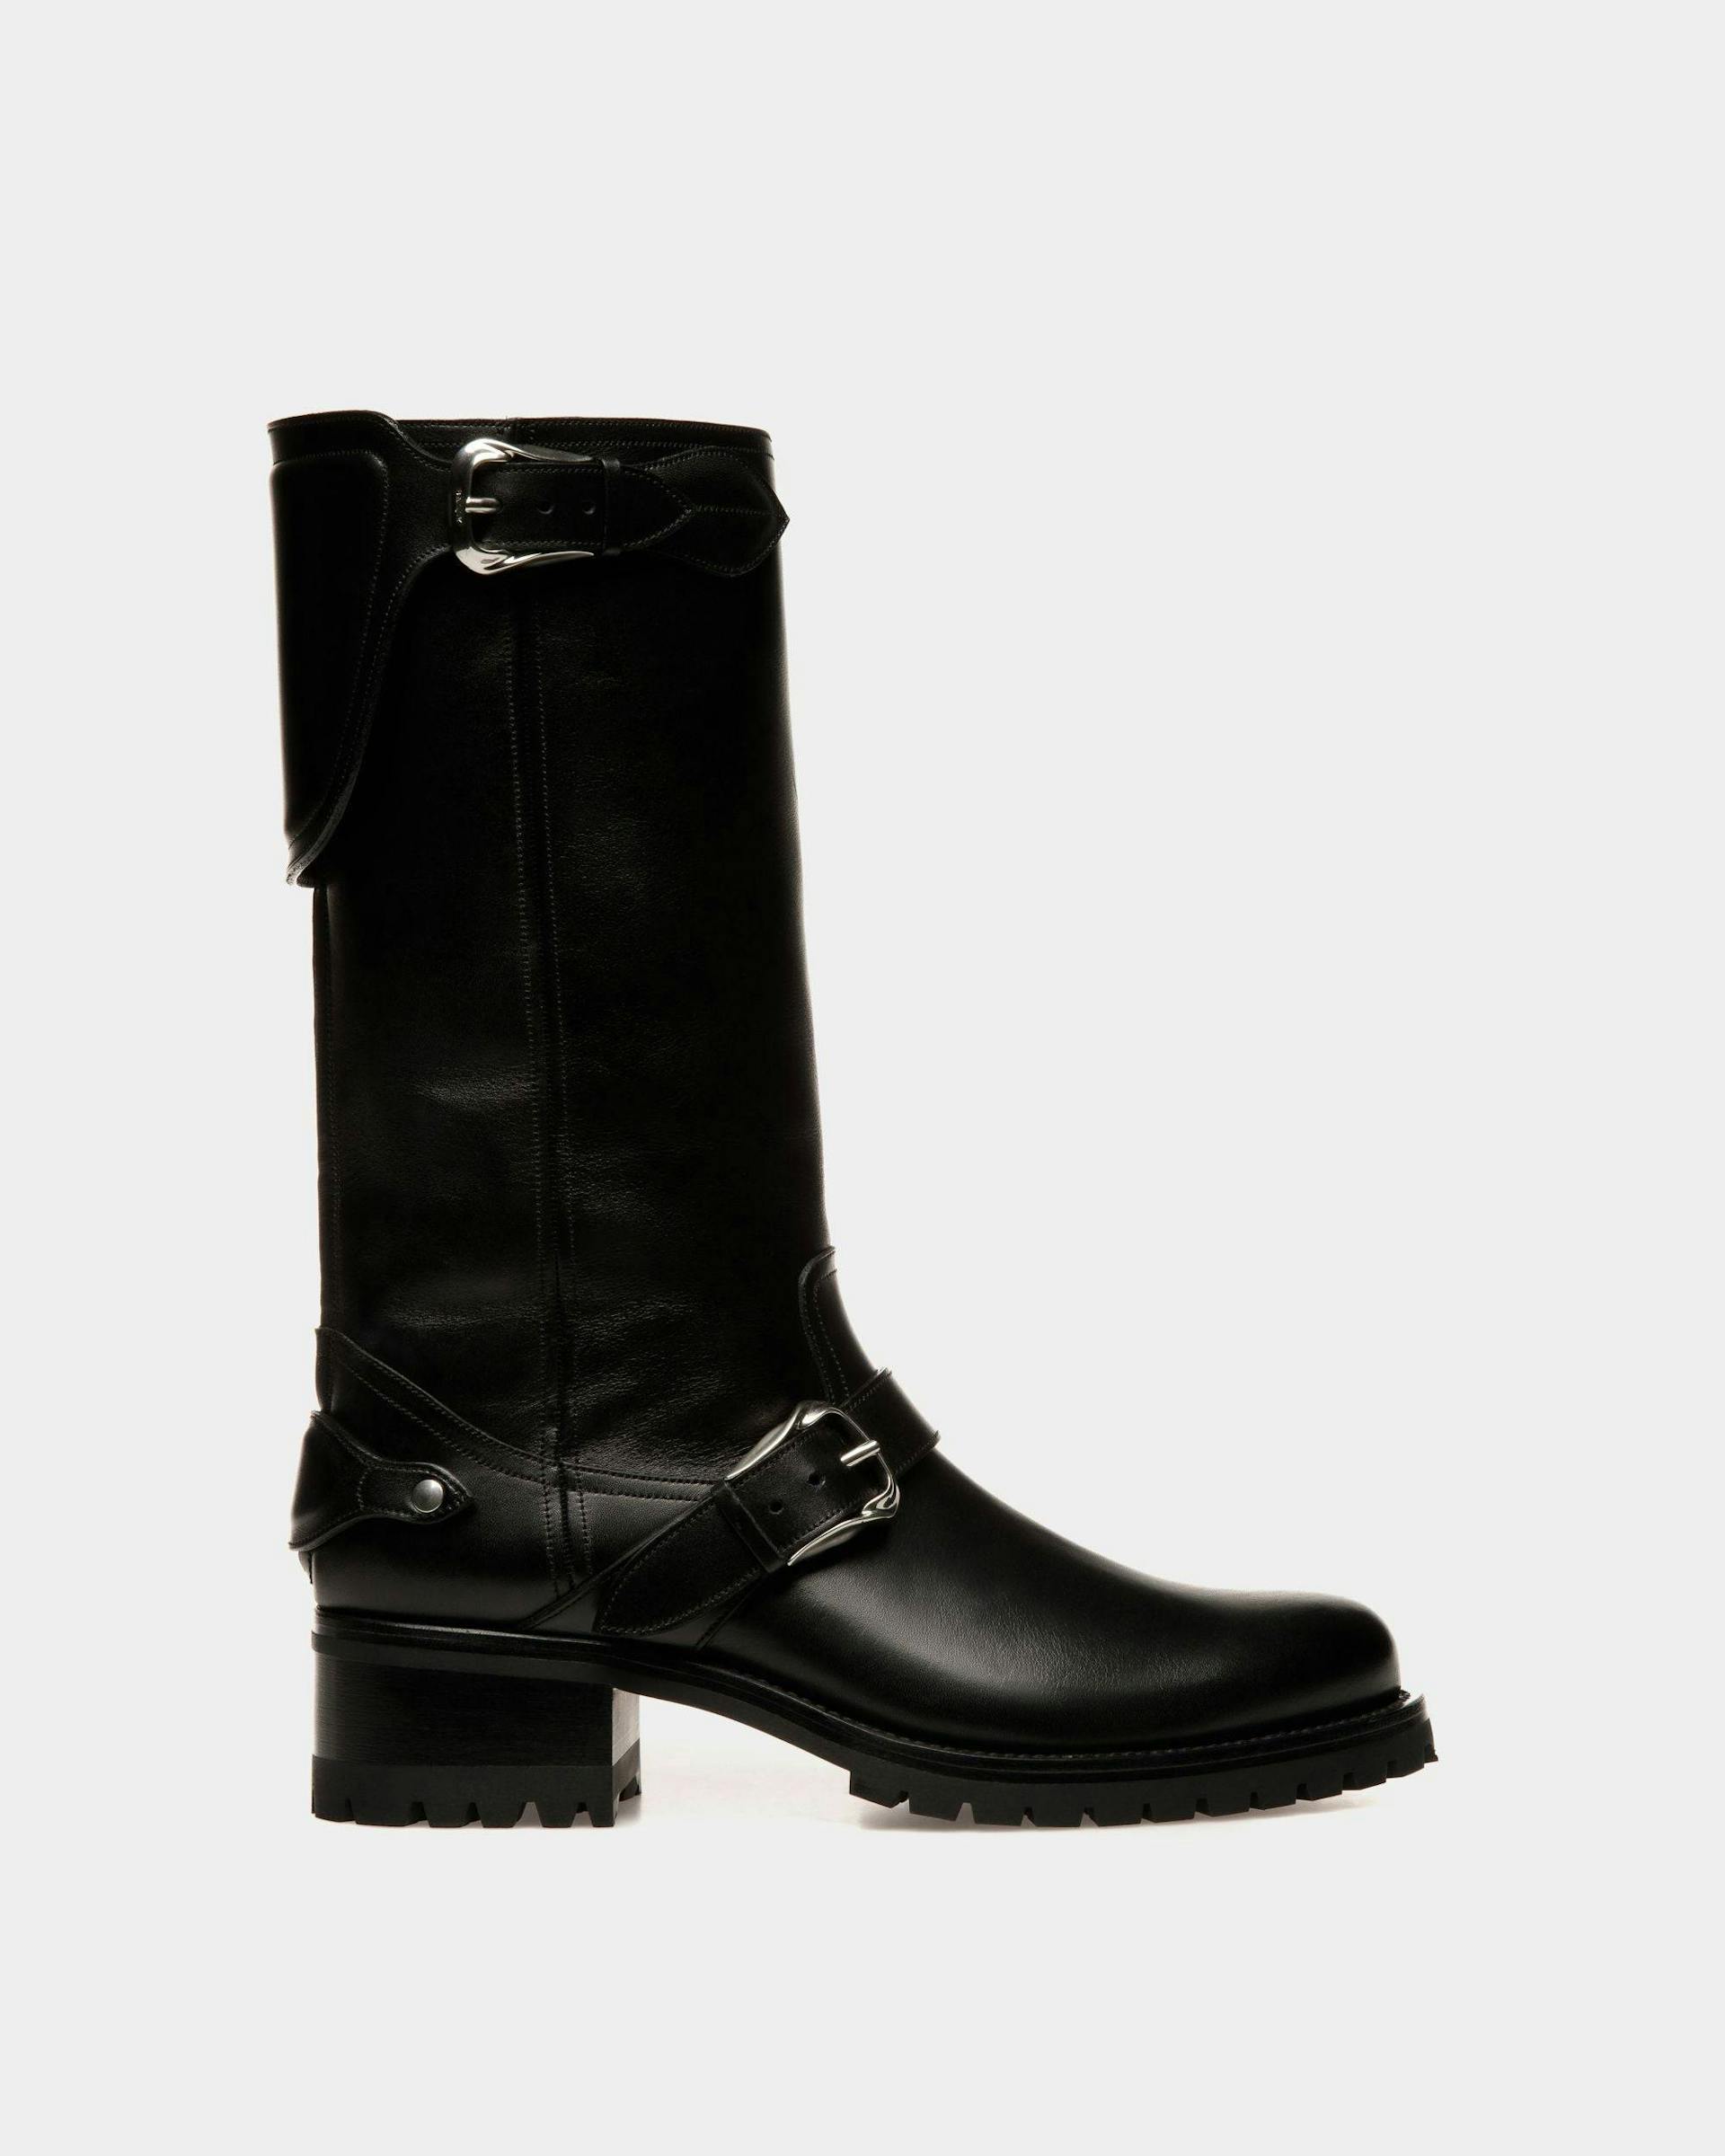 Men's Ardis Long Boots In Black Leather | Bally | Still Life Side